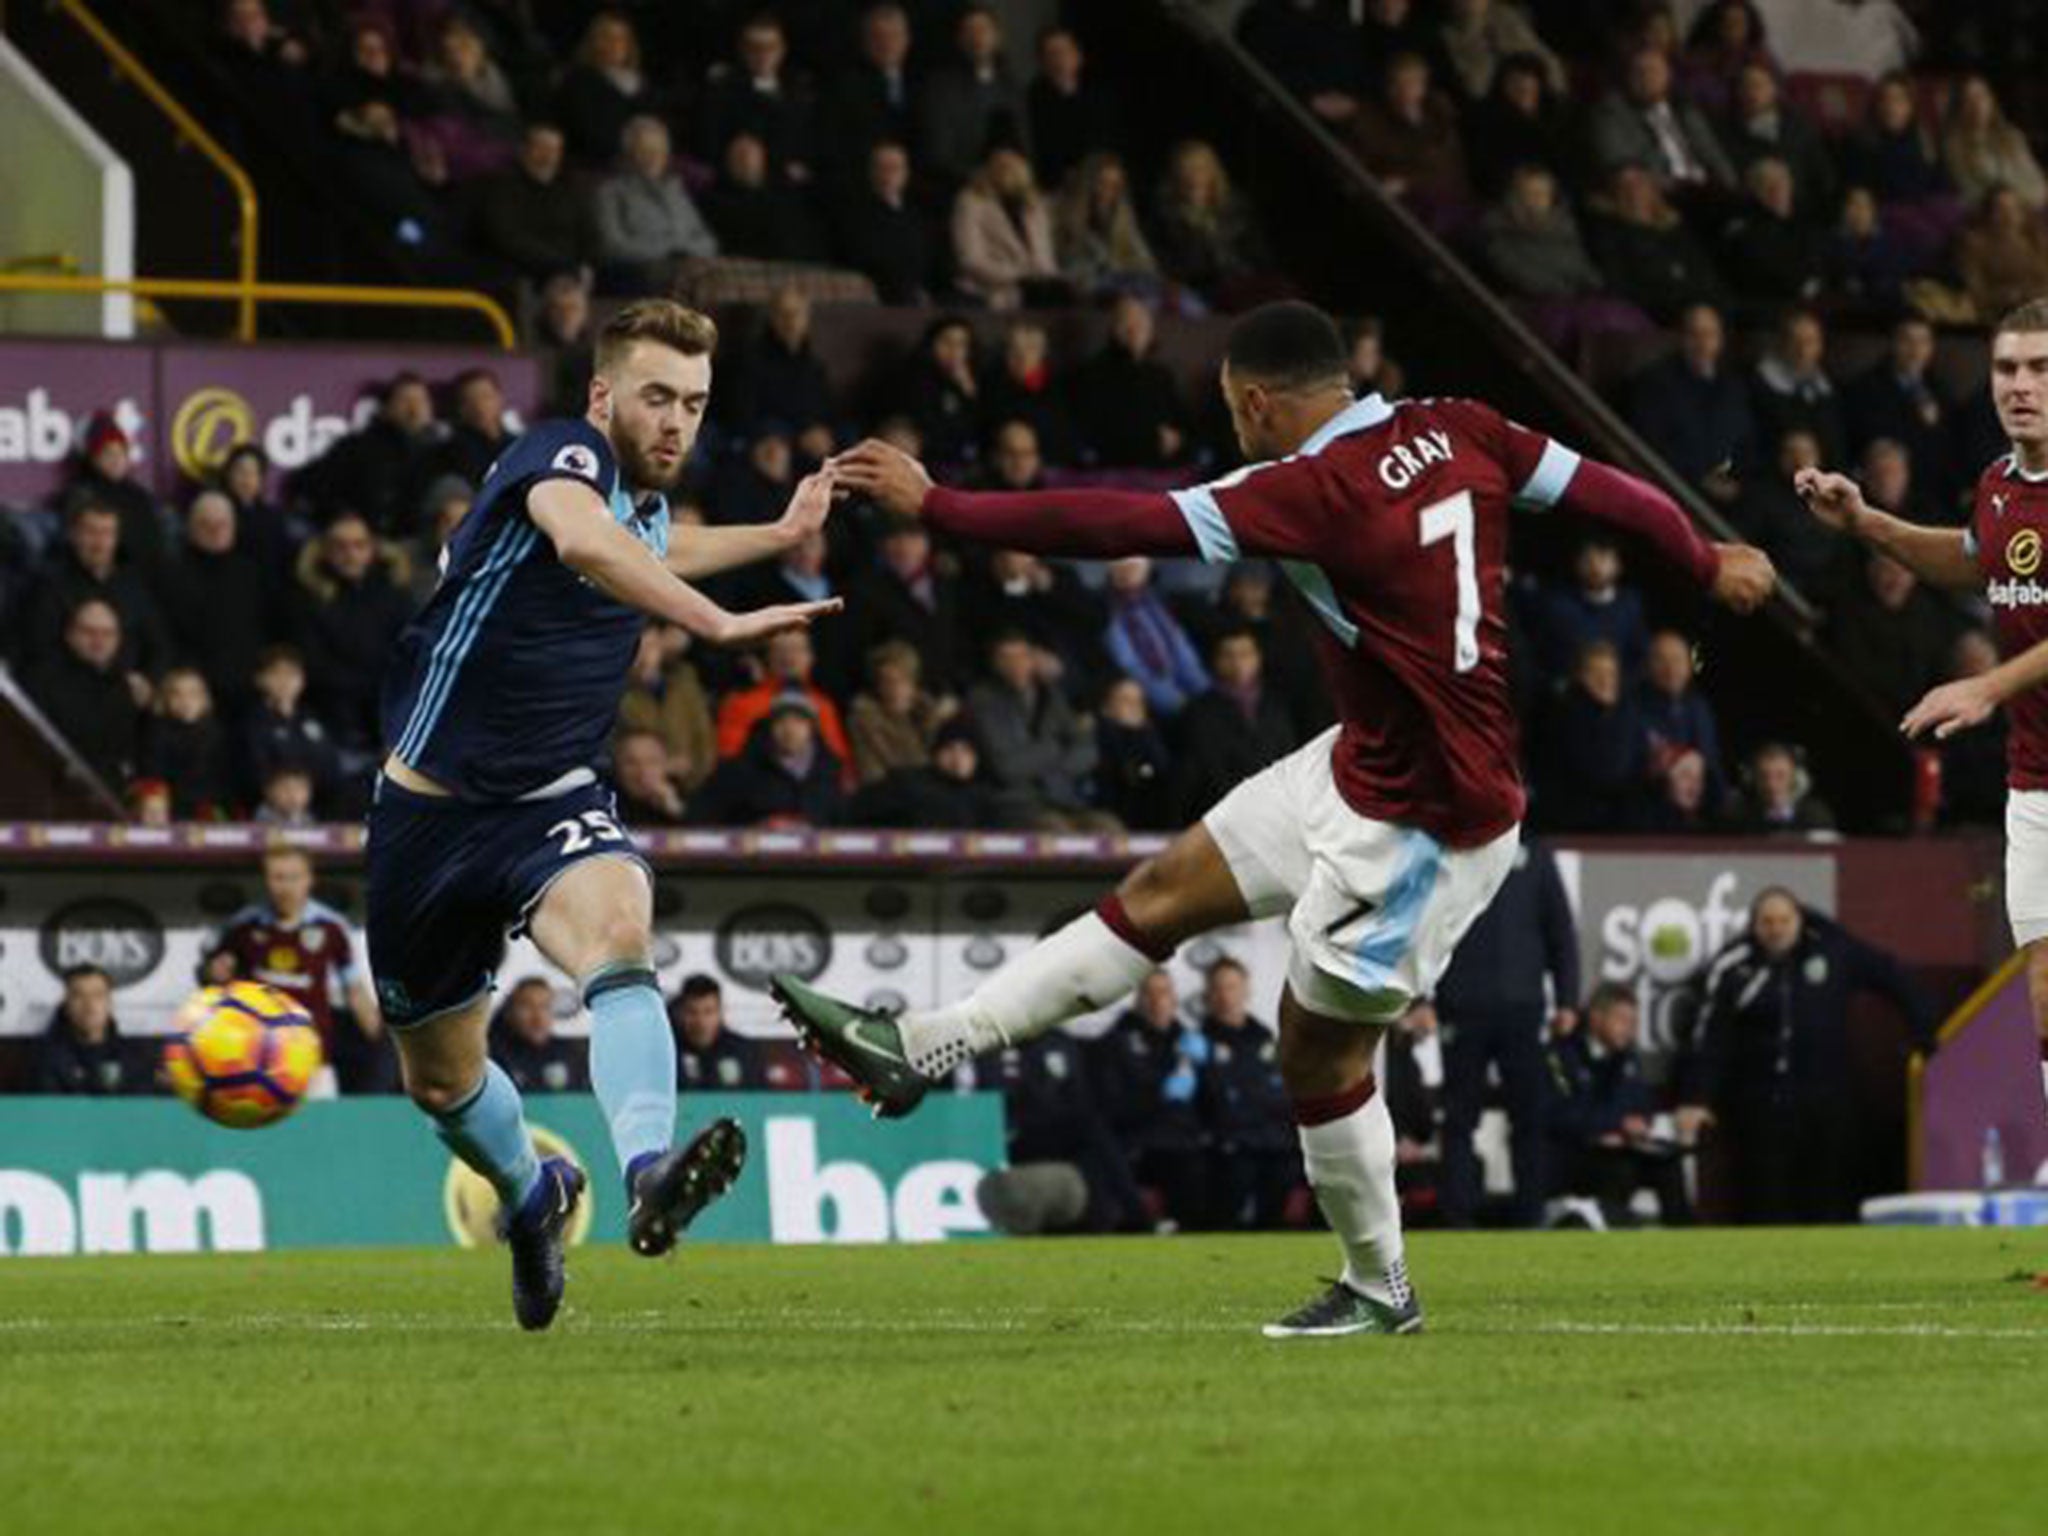 Andre Gray fires in Burnley's winning goal against Middlesbrough